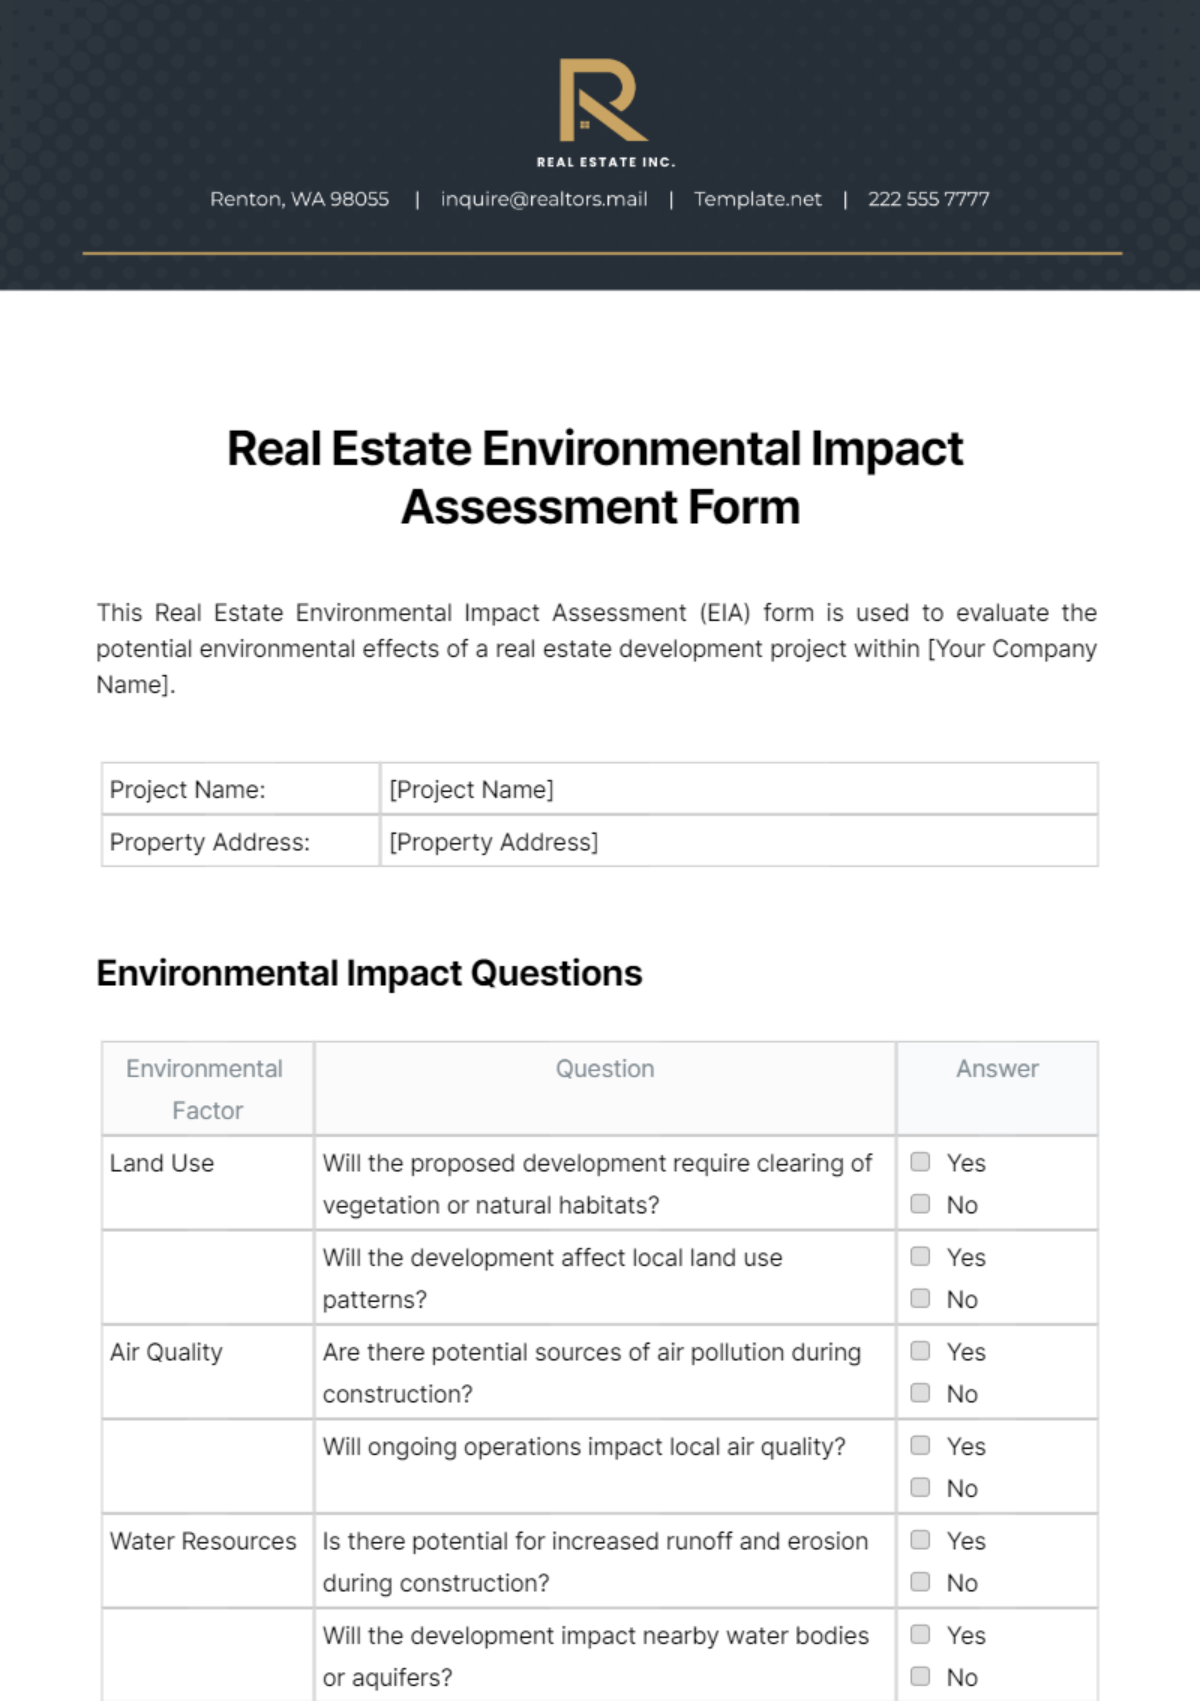 Real Estate Environmental Impact Assessment Form Template